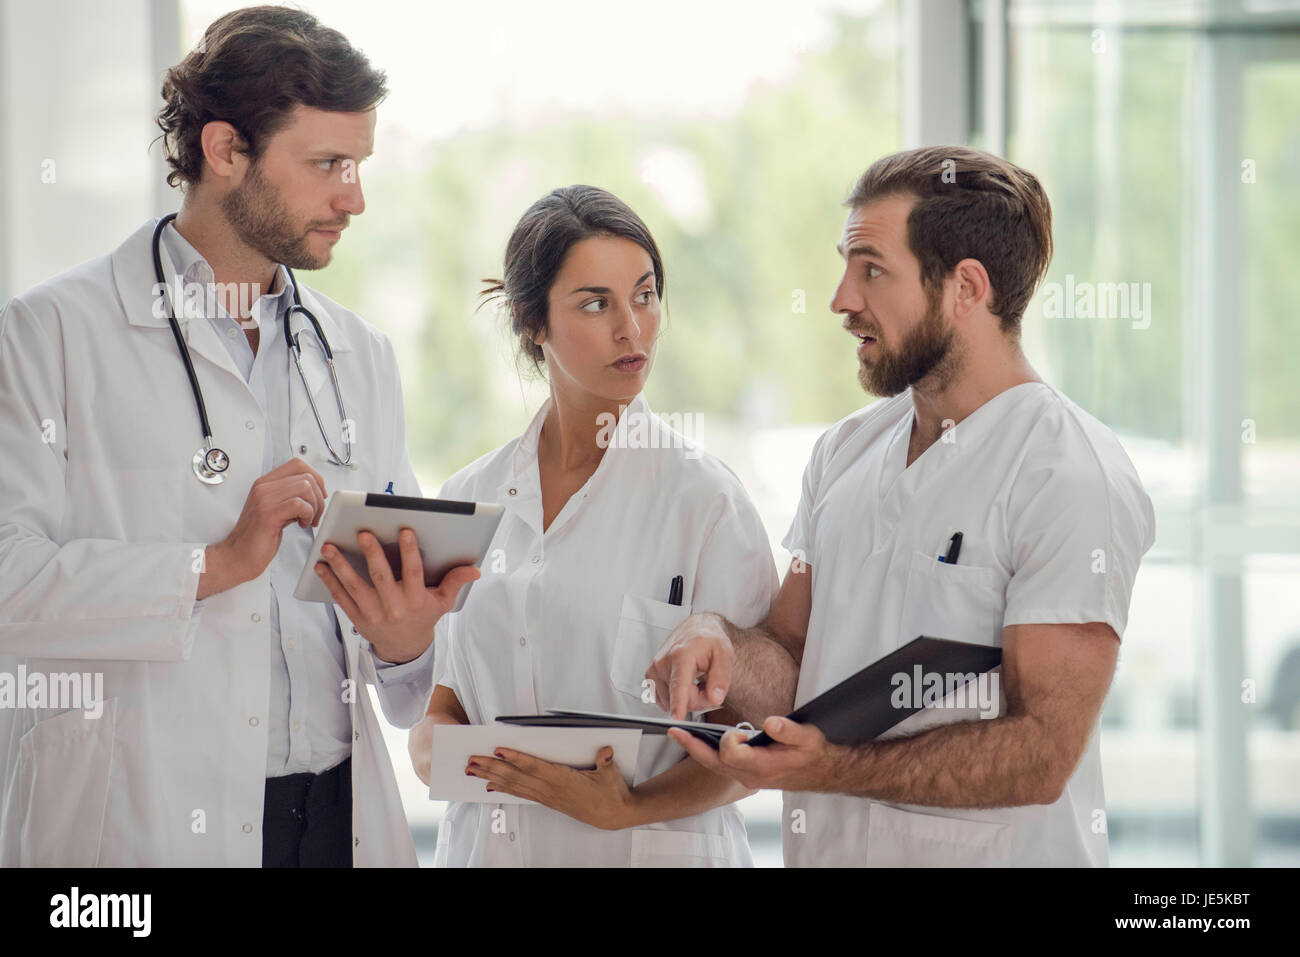 Healthcare professionals working together Stock Photo